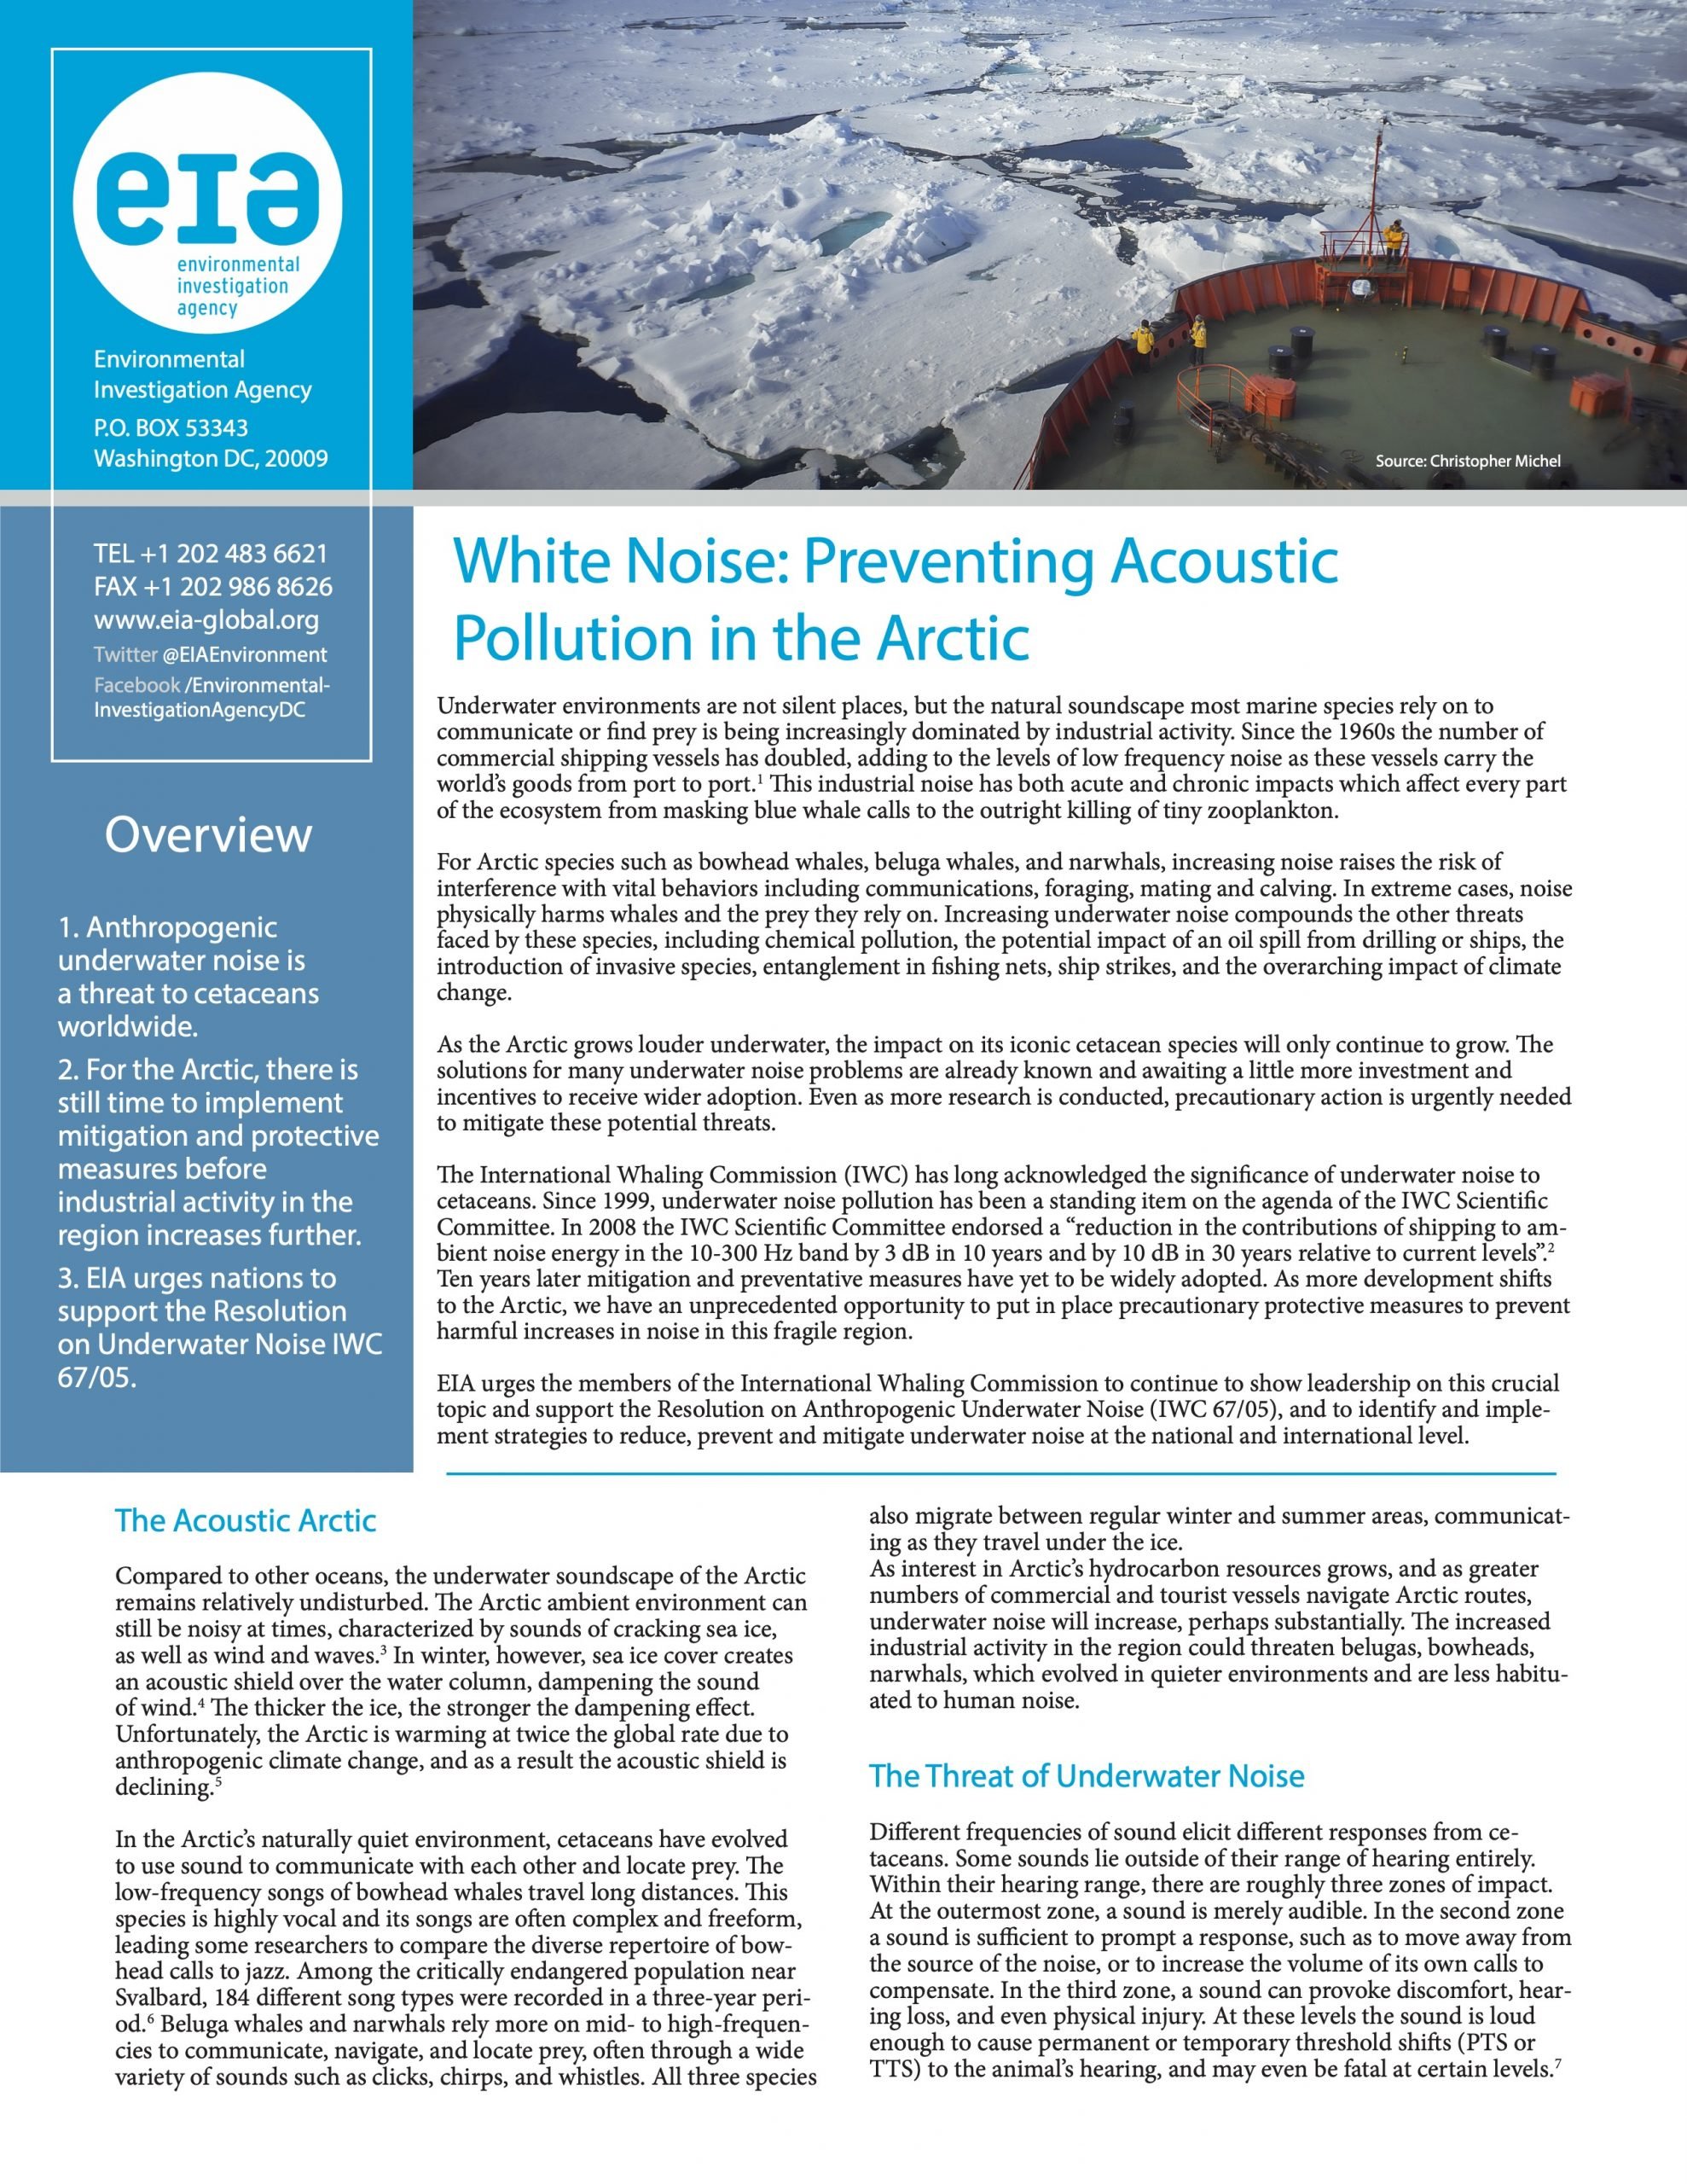 White Noise: Preventing Acoustic Pollution in the Arctic